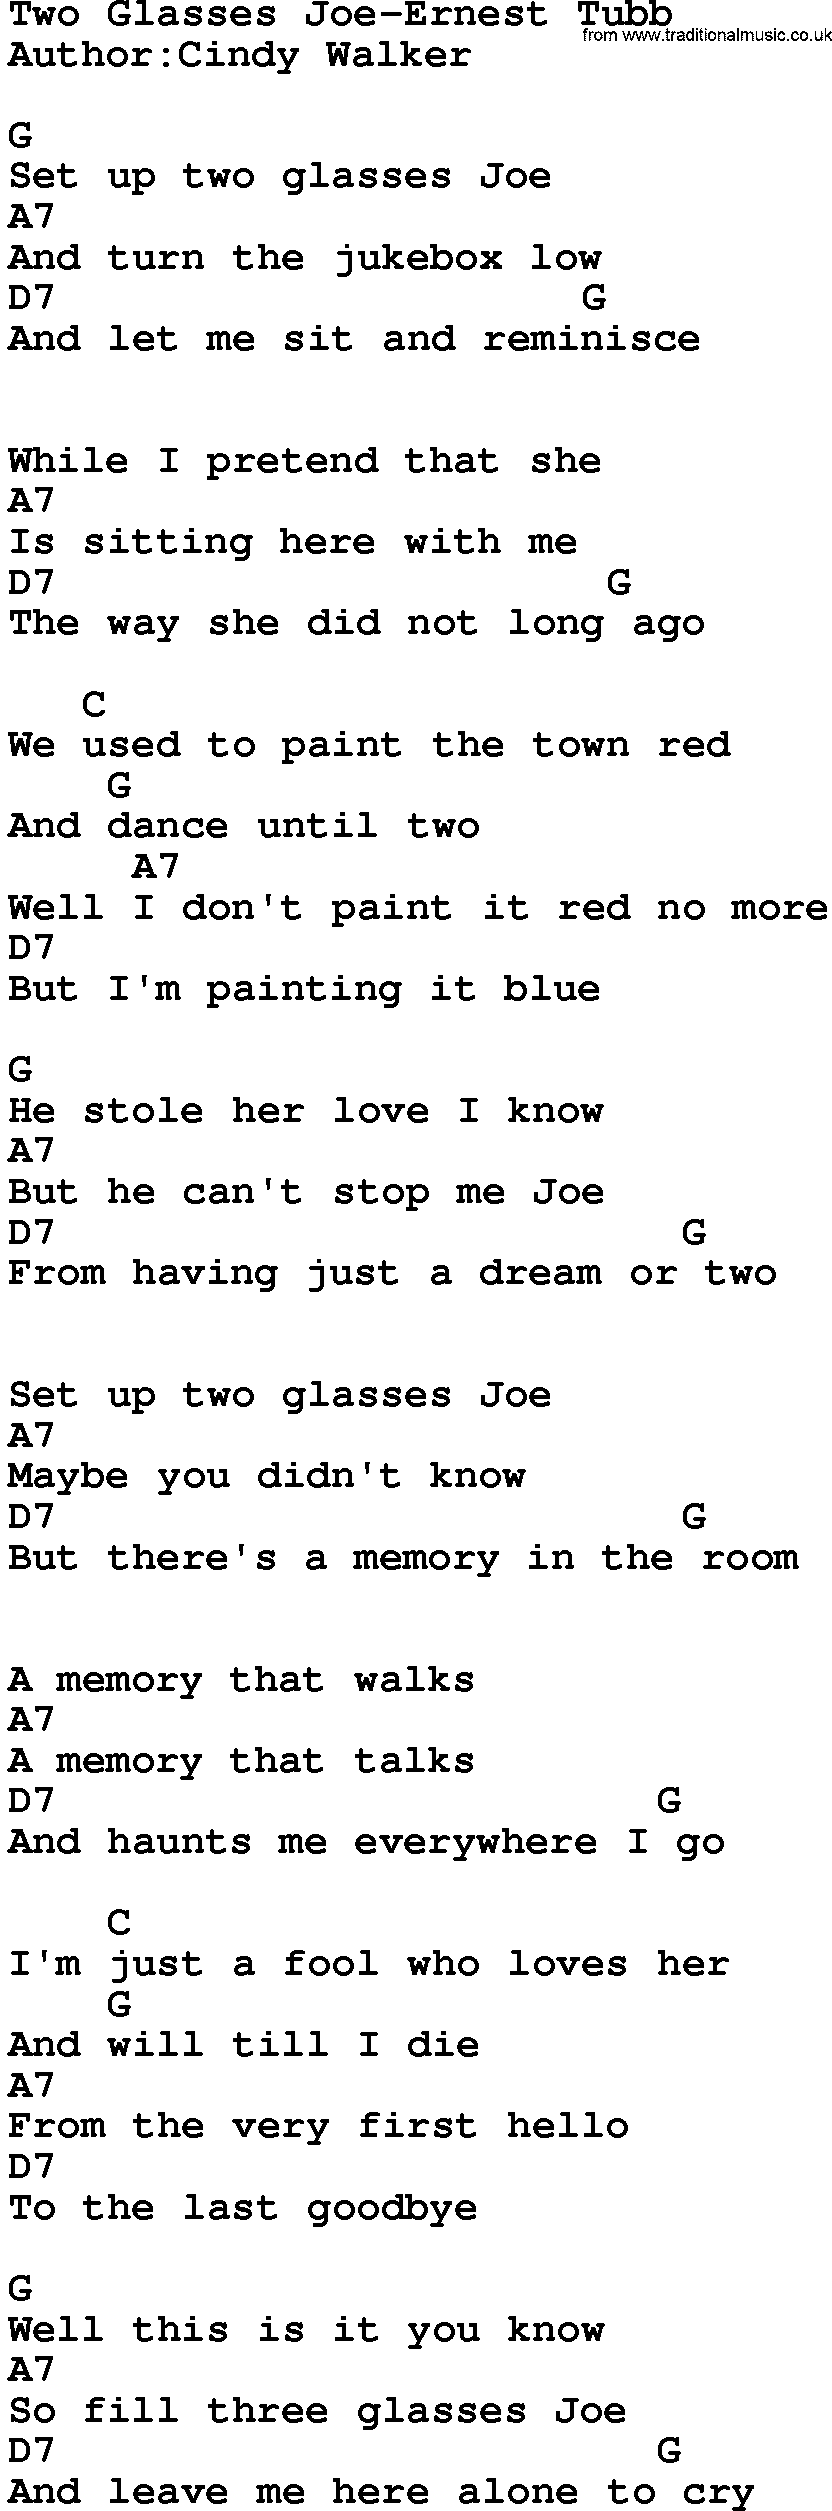 Country music song: Two Glasses Joe-Ernest Tubb lyrics and chords